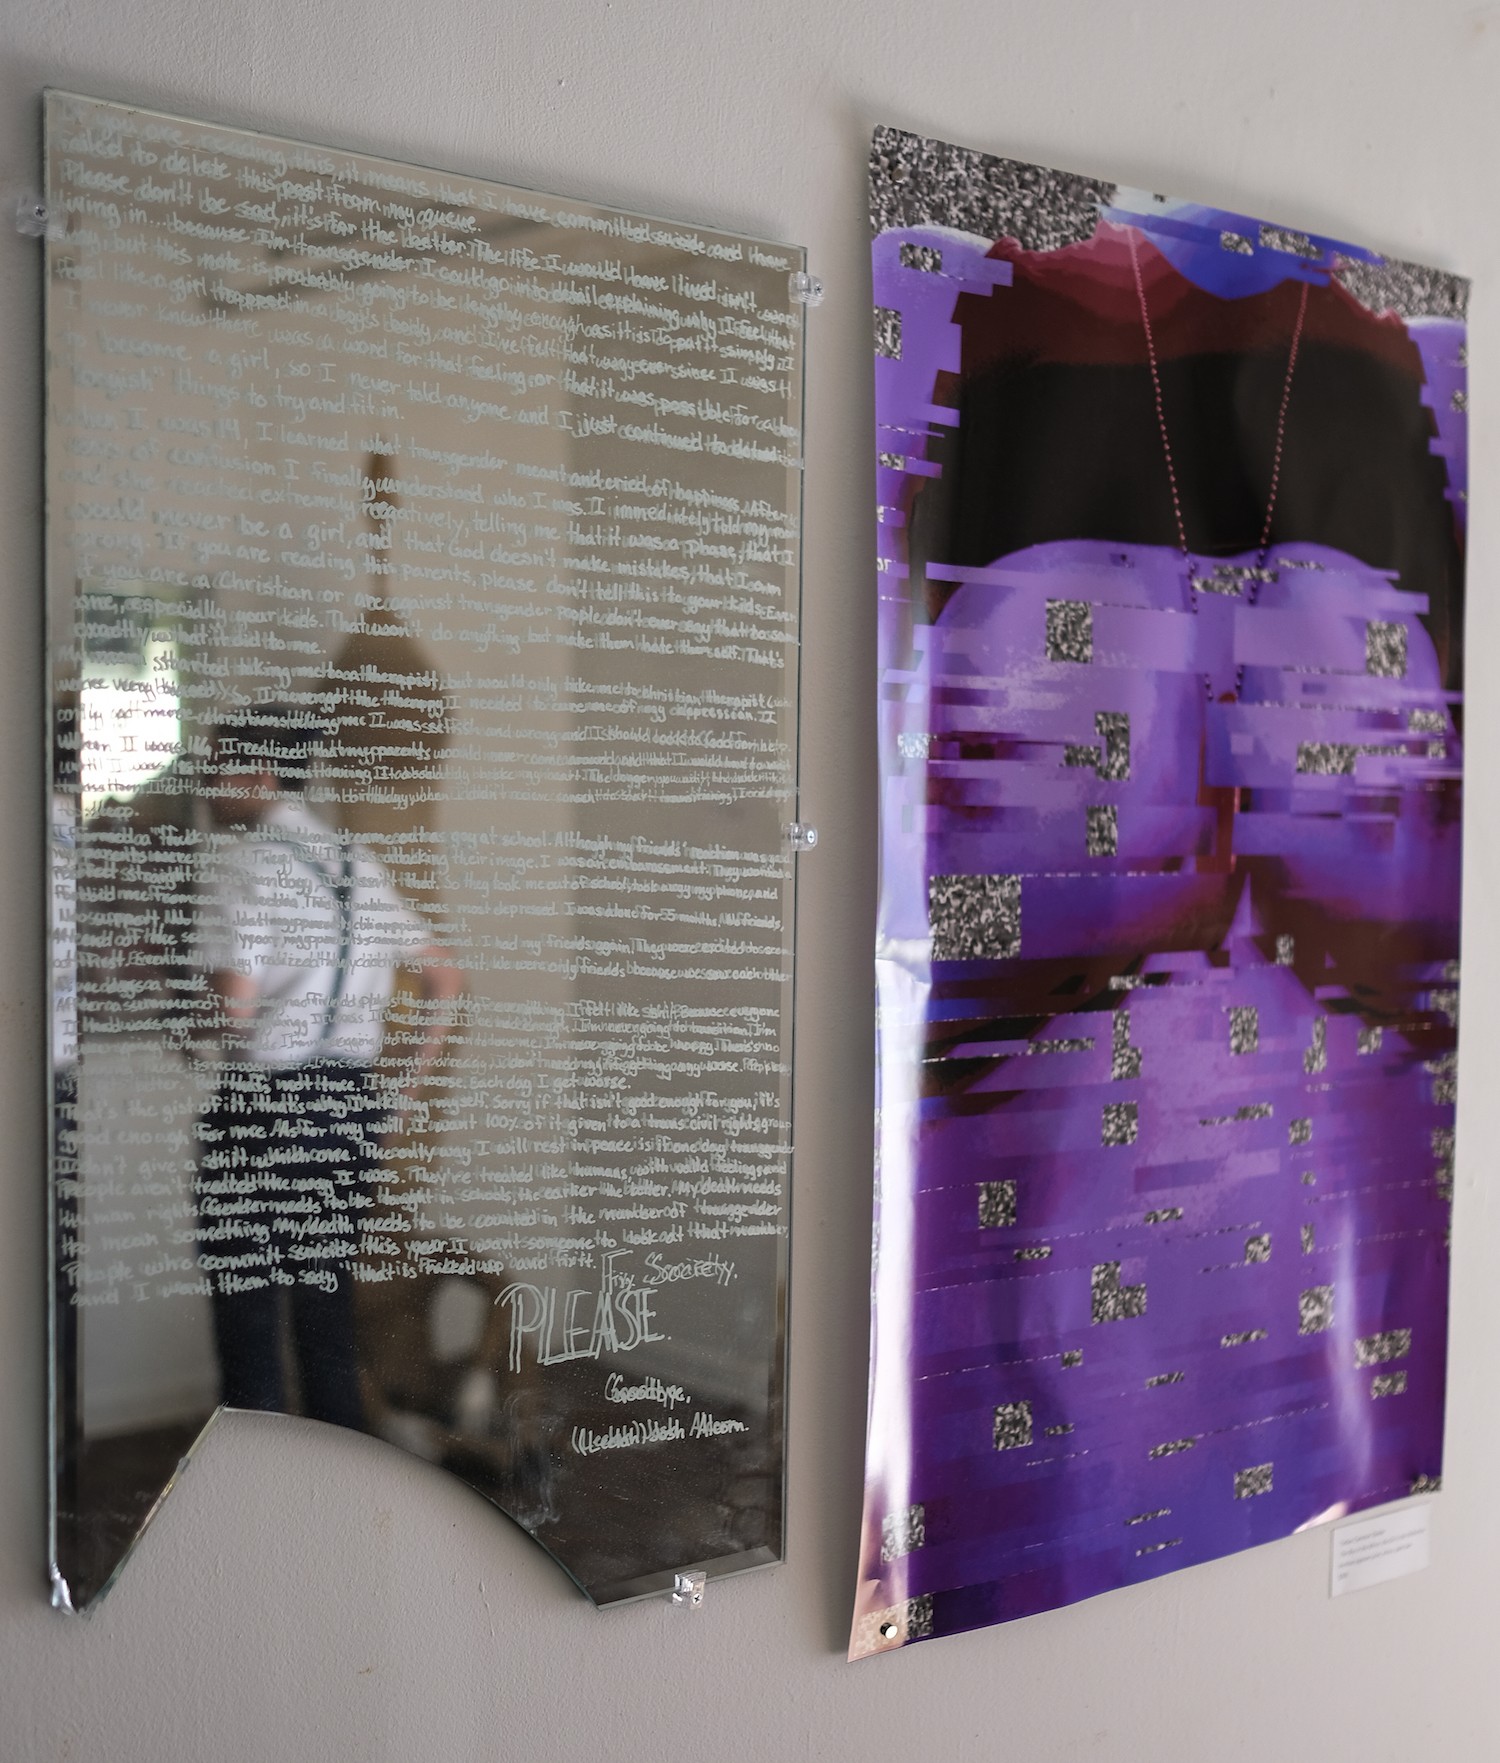 Tobias Cameran Stalder is seen in the reflection of his piece titled &#147;The Boy in the Mirror, the Girl in the Reflection&#148;.